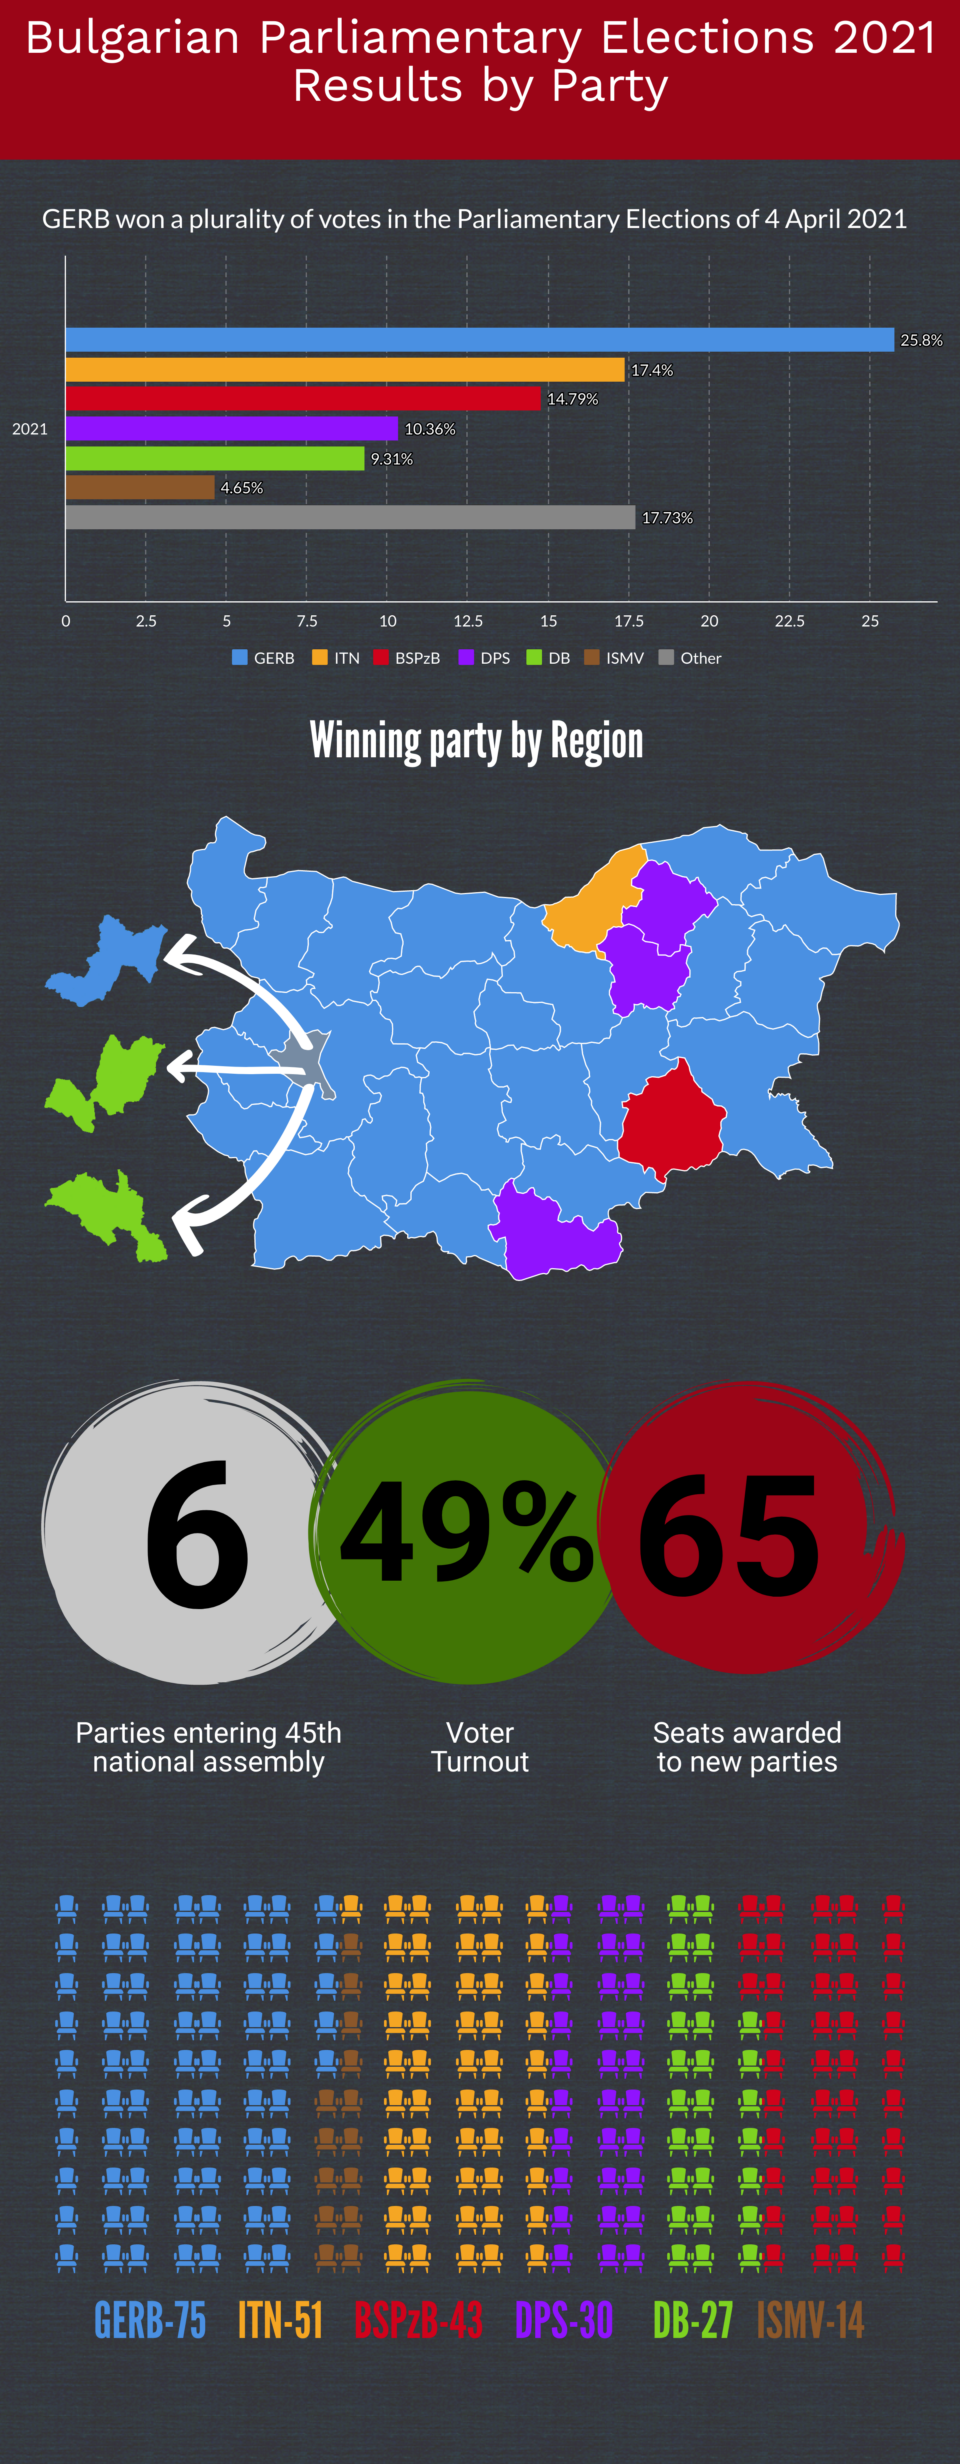 April 2021 Bulgarian Parliamentary Elections Results